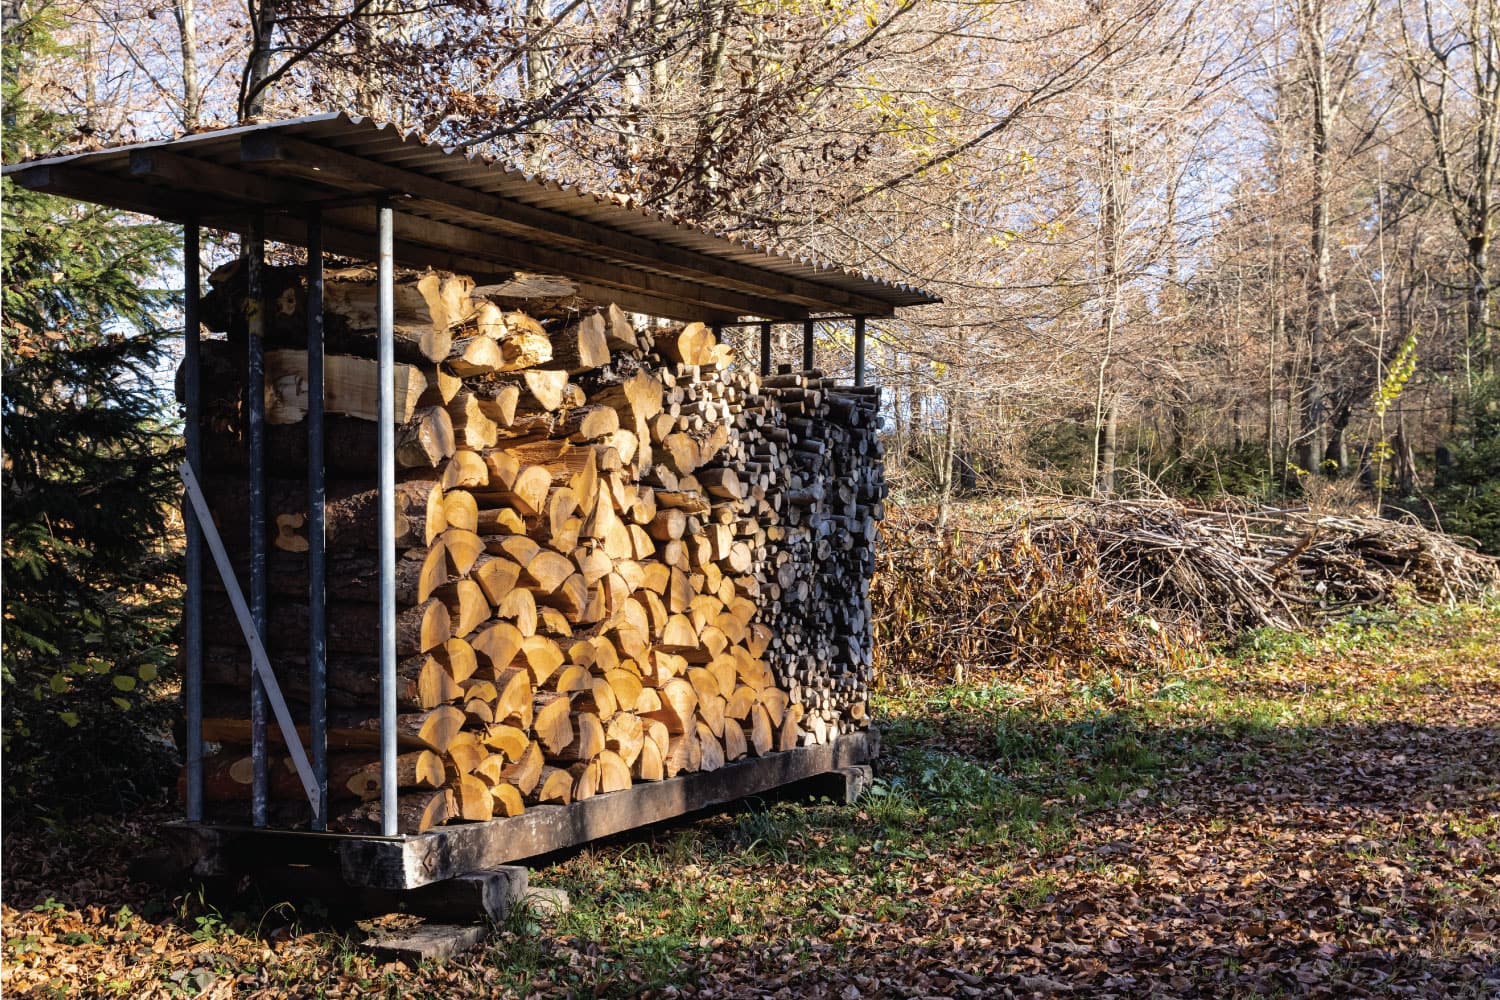 covered wood pile with firewood for winter in sunny autumn forest, in the background is thinner stacked wood